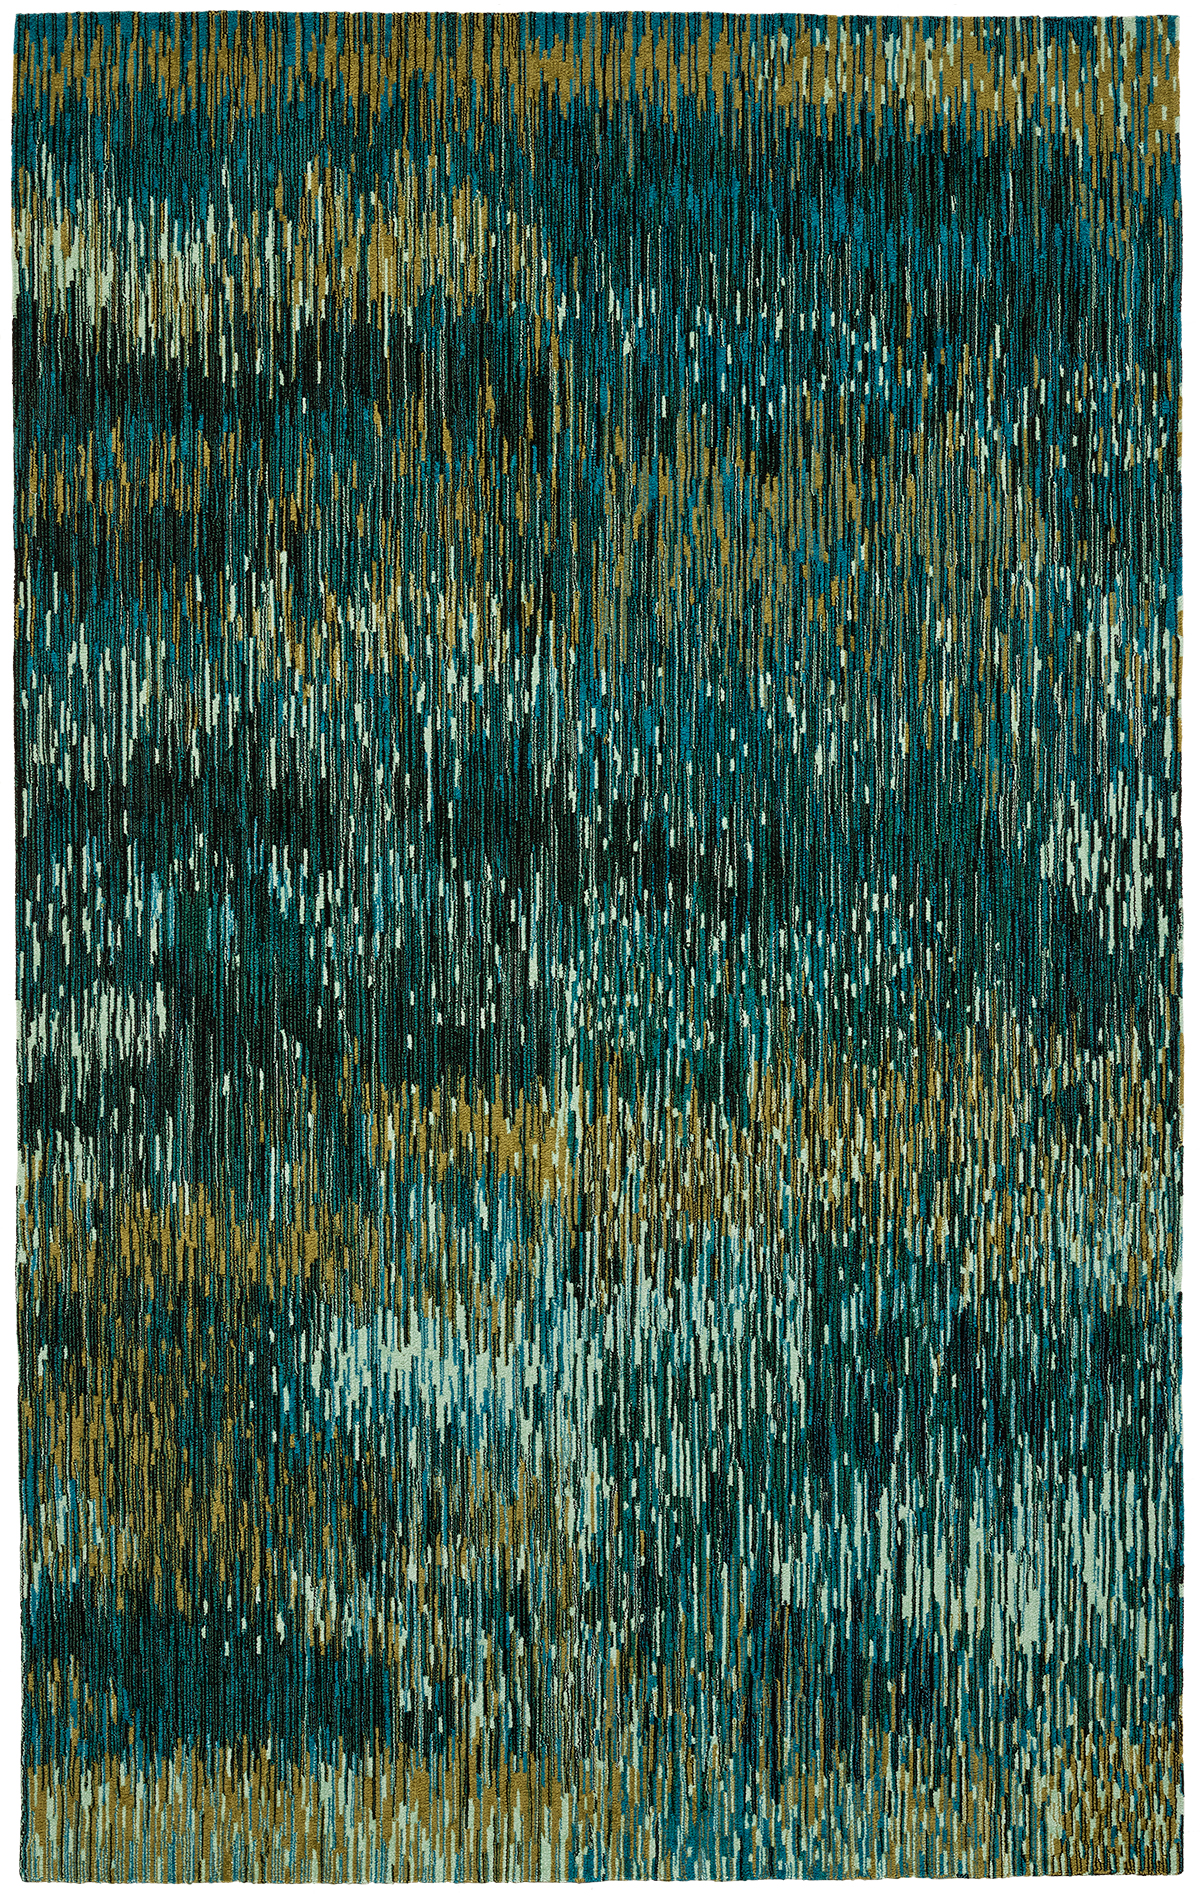 crosby_street_studios_products_CSS_Frequency_Impressionistic_RUG